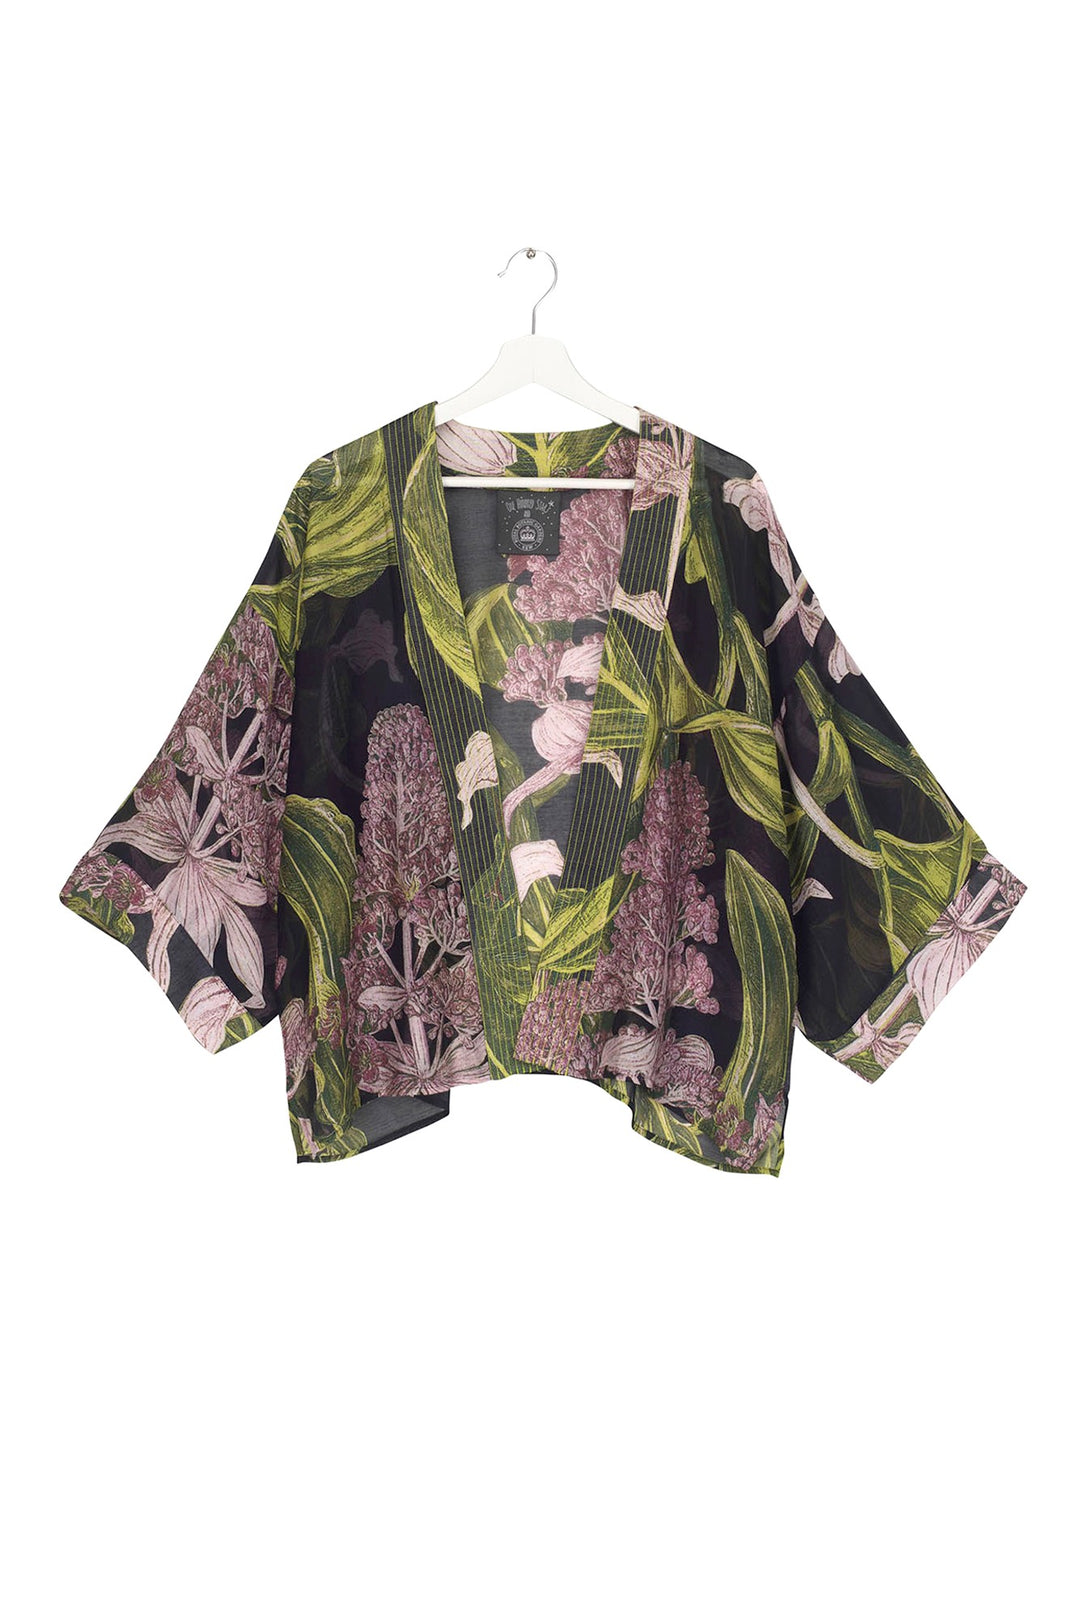 Marianne North Medinilla Kimono- Our bestselling kimono jackets have loose ¾ length sleeves, an open front and a lightly embroidered lapel. Pair with a matching camisole and your favourite jeans in summer or layer over a polo neck during the cooler months.